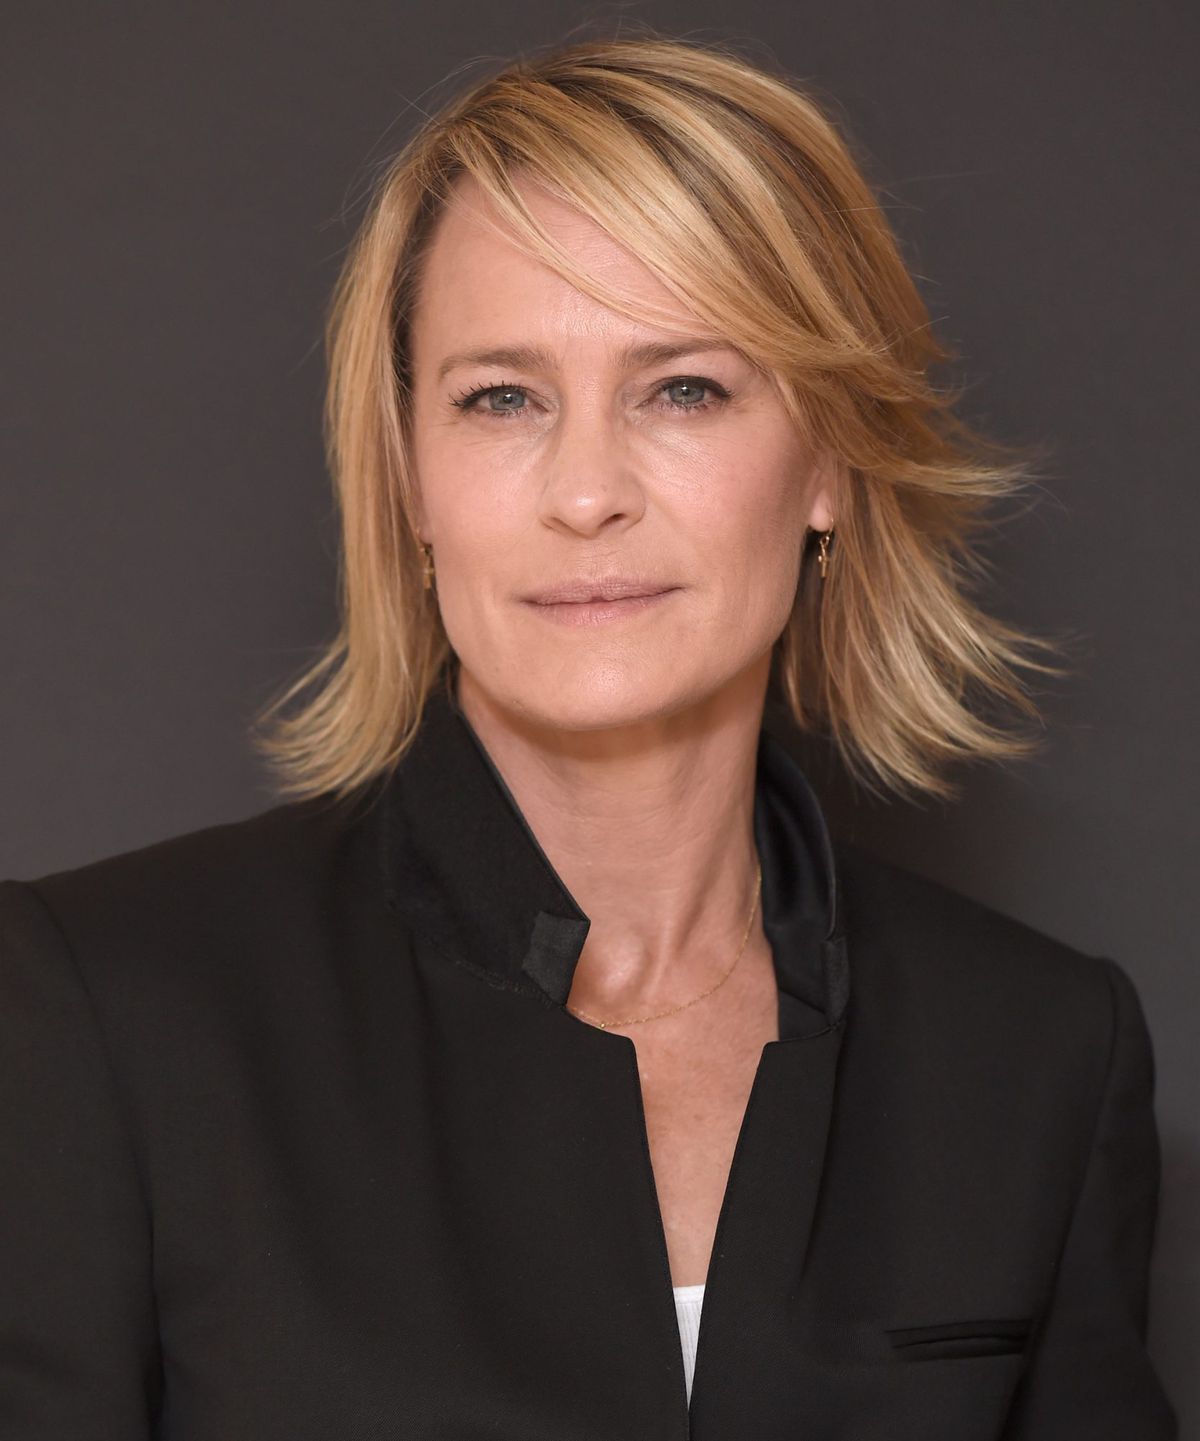 attends Women In Motion: Robin Wright during the 70th annual Cannes Film Festival at Palais des Festivals on May 18, 2017 in Cannes, France.TK